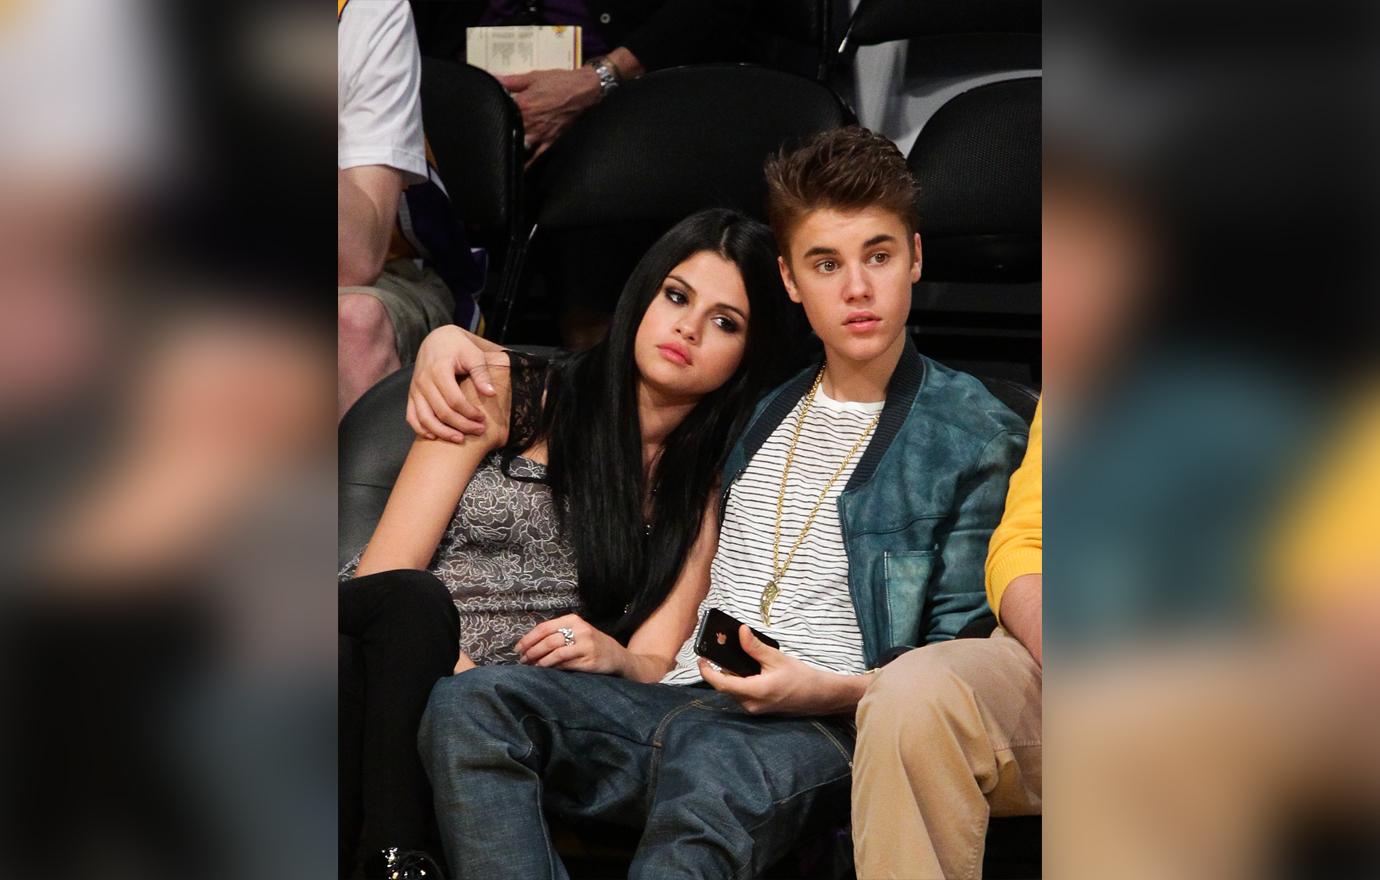 Justin Bieber Sits With His Arm Around Selena Gomez Sitting Watching Game